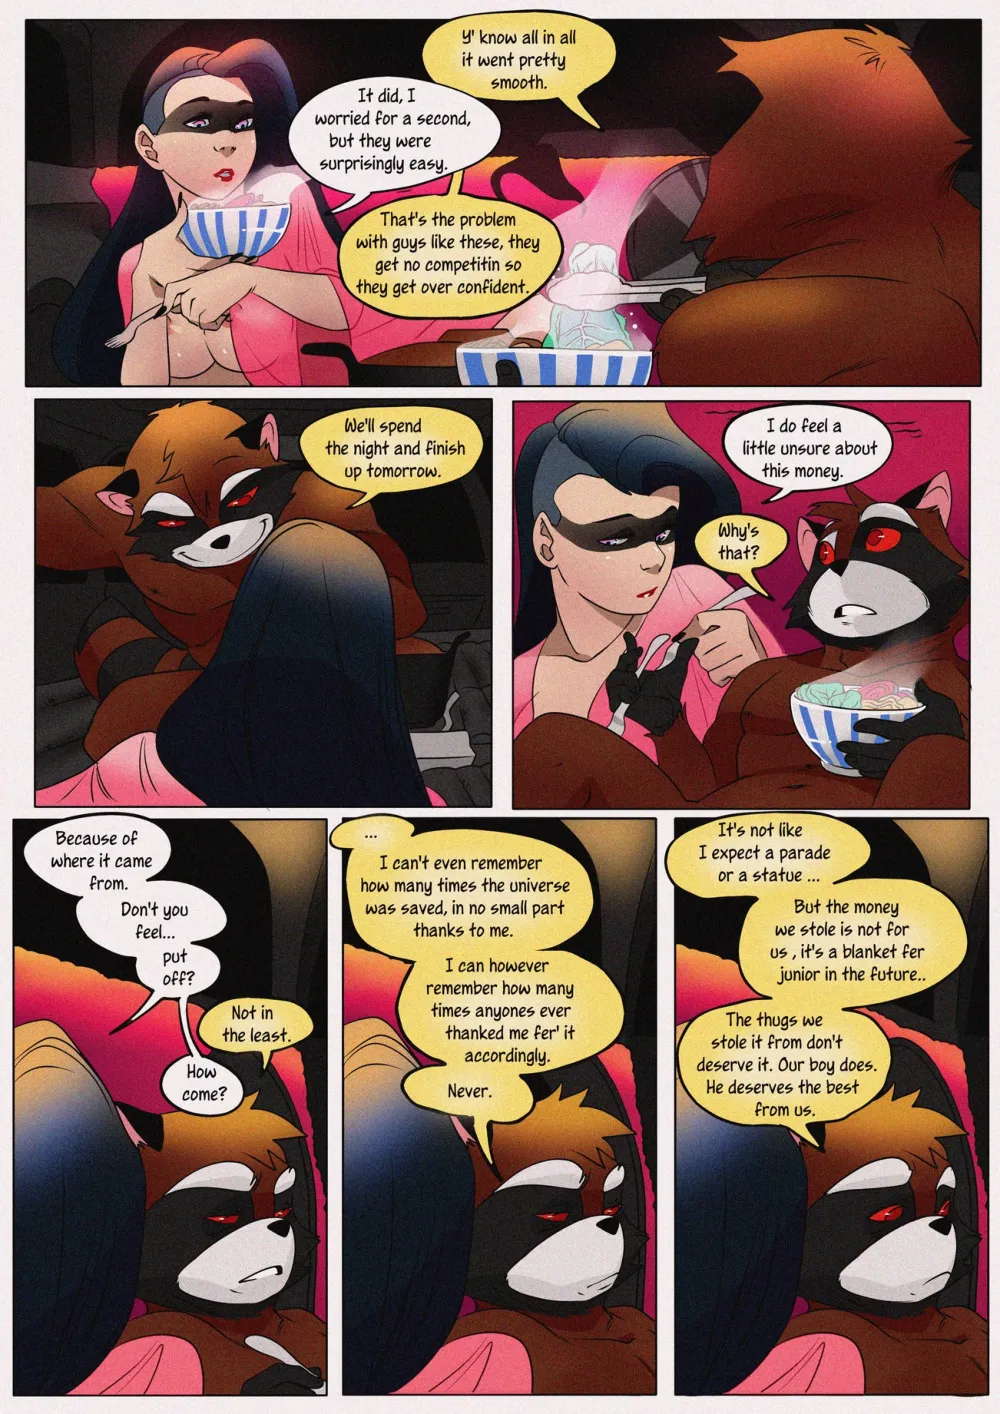 Wasted potential - Page 10